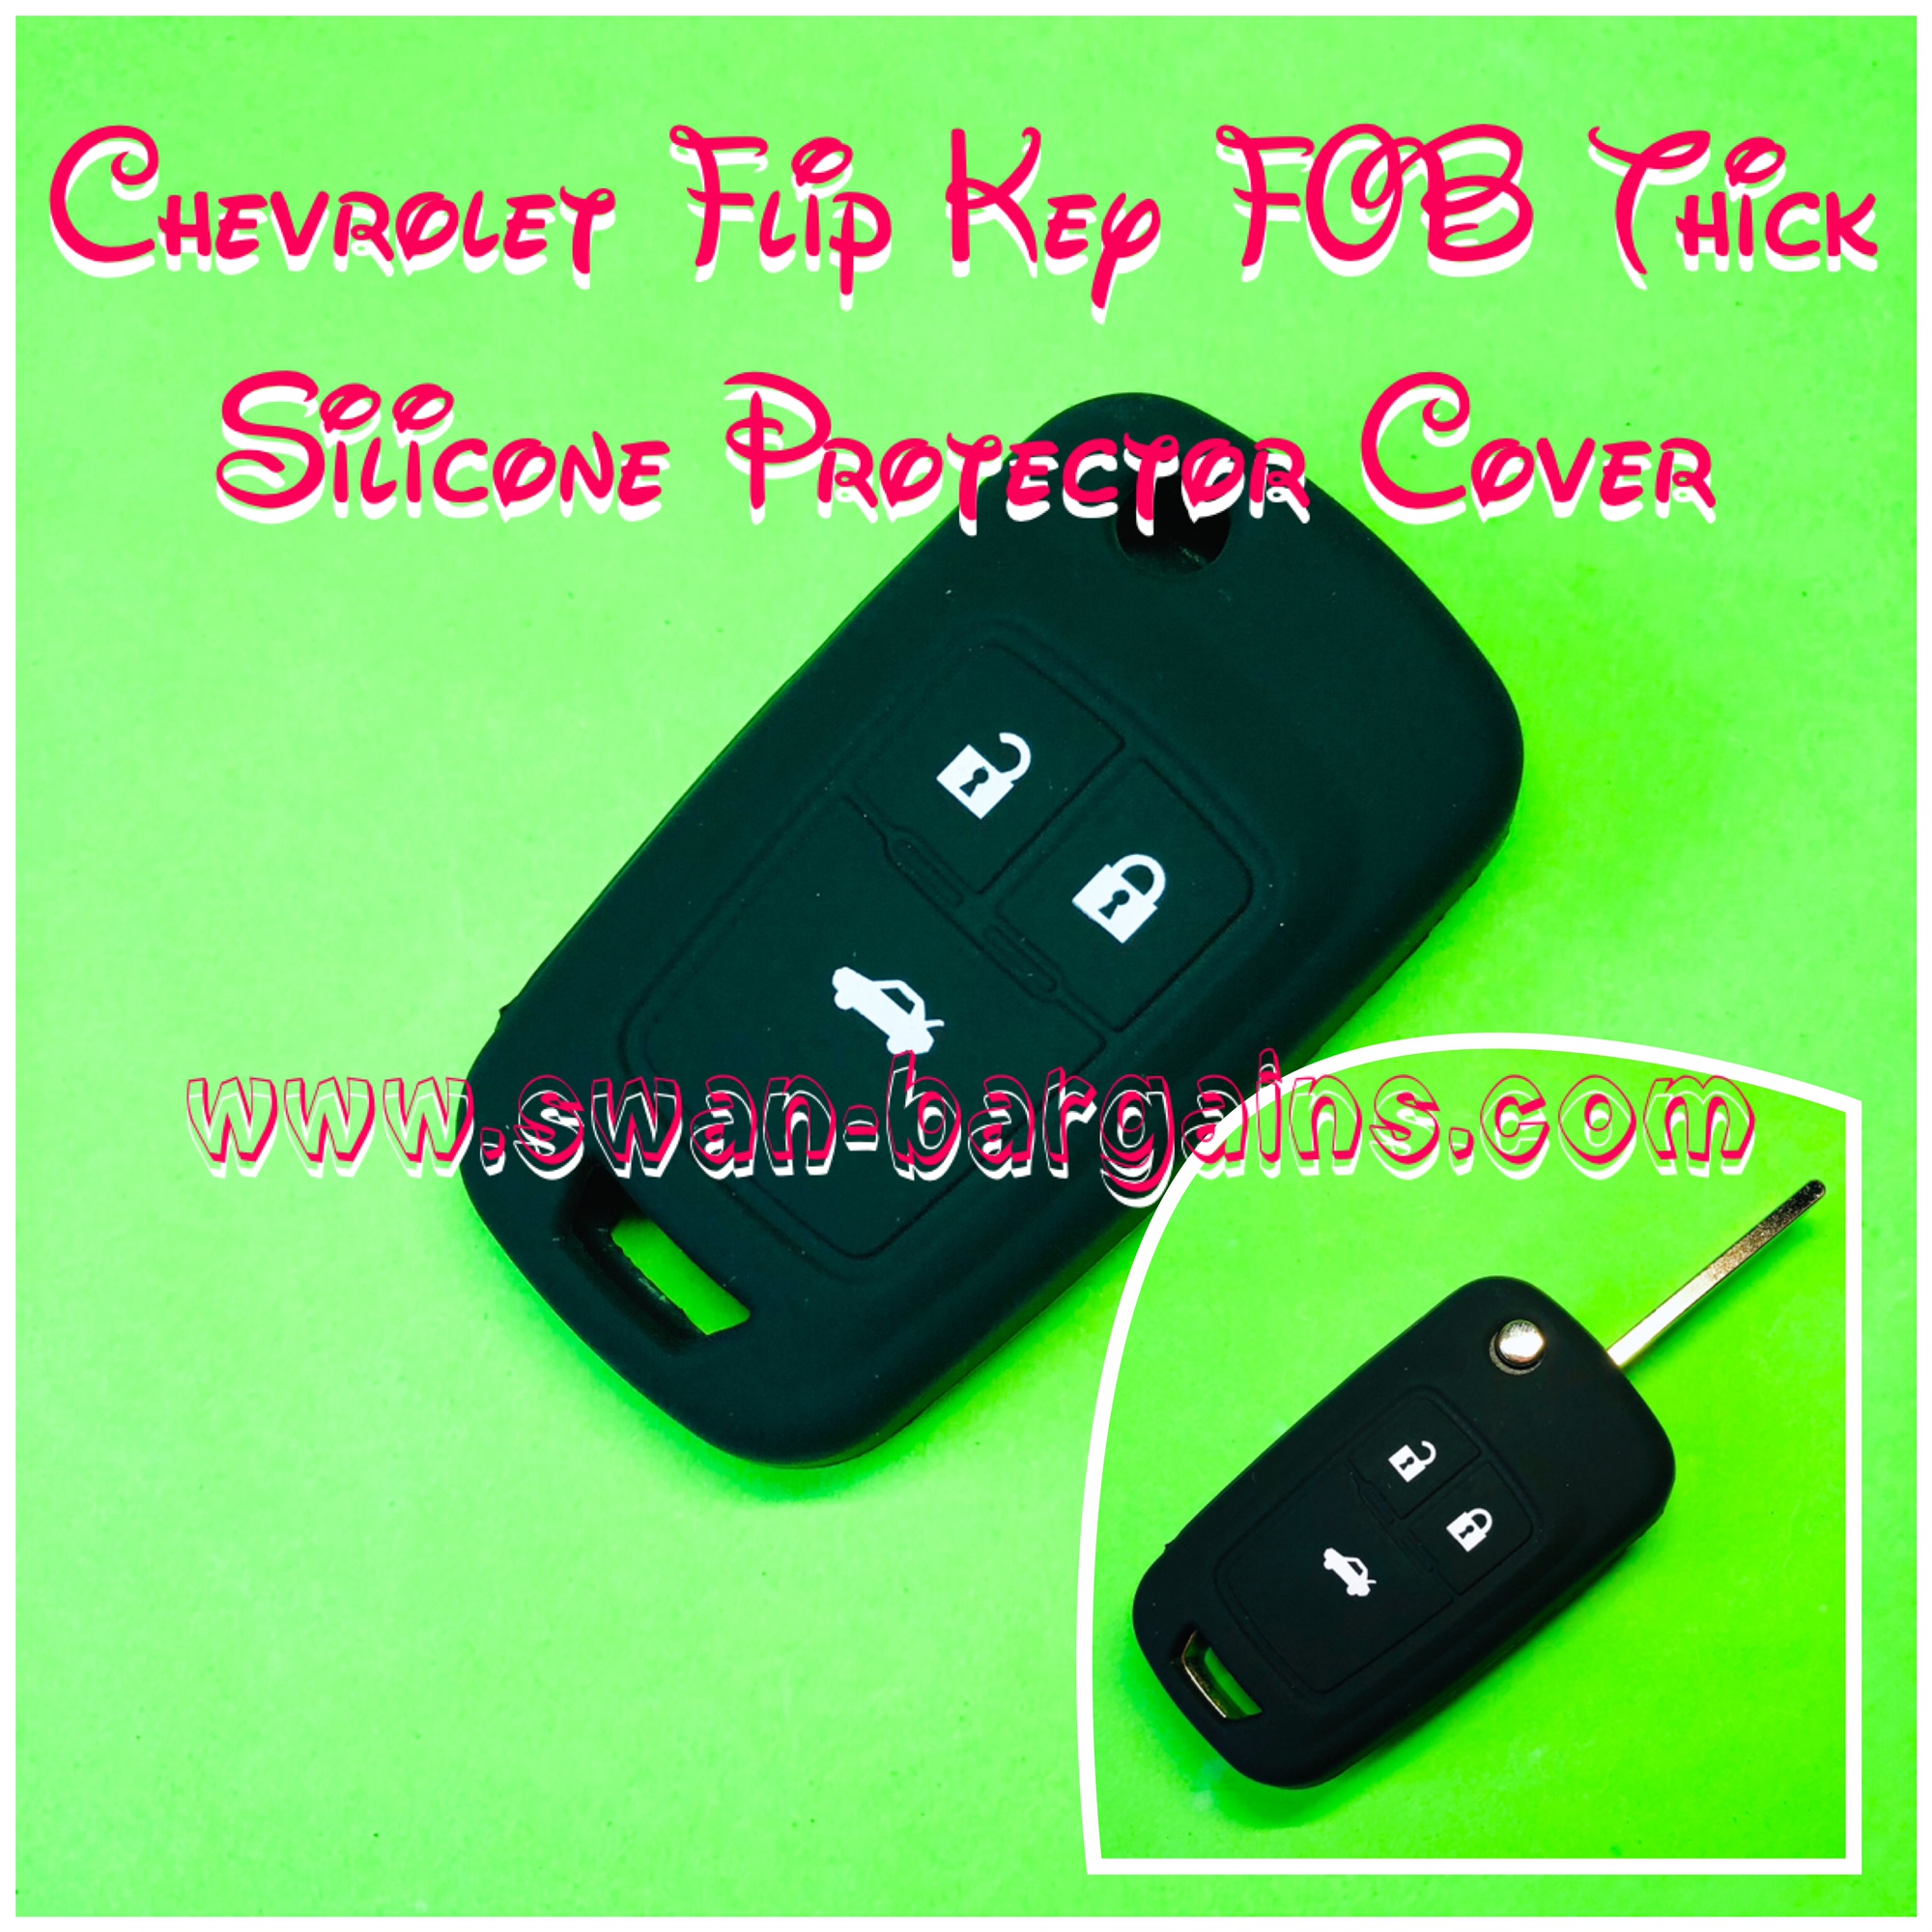 Chevrolet Cruze Remote Key Silicon Cover Singapore - Thicken Protector Sleeve